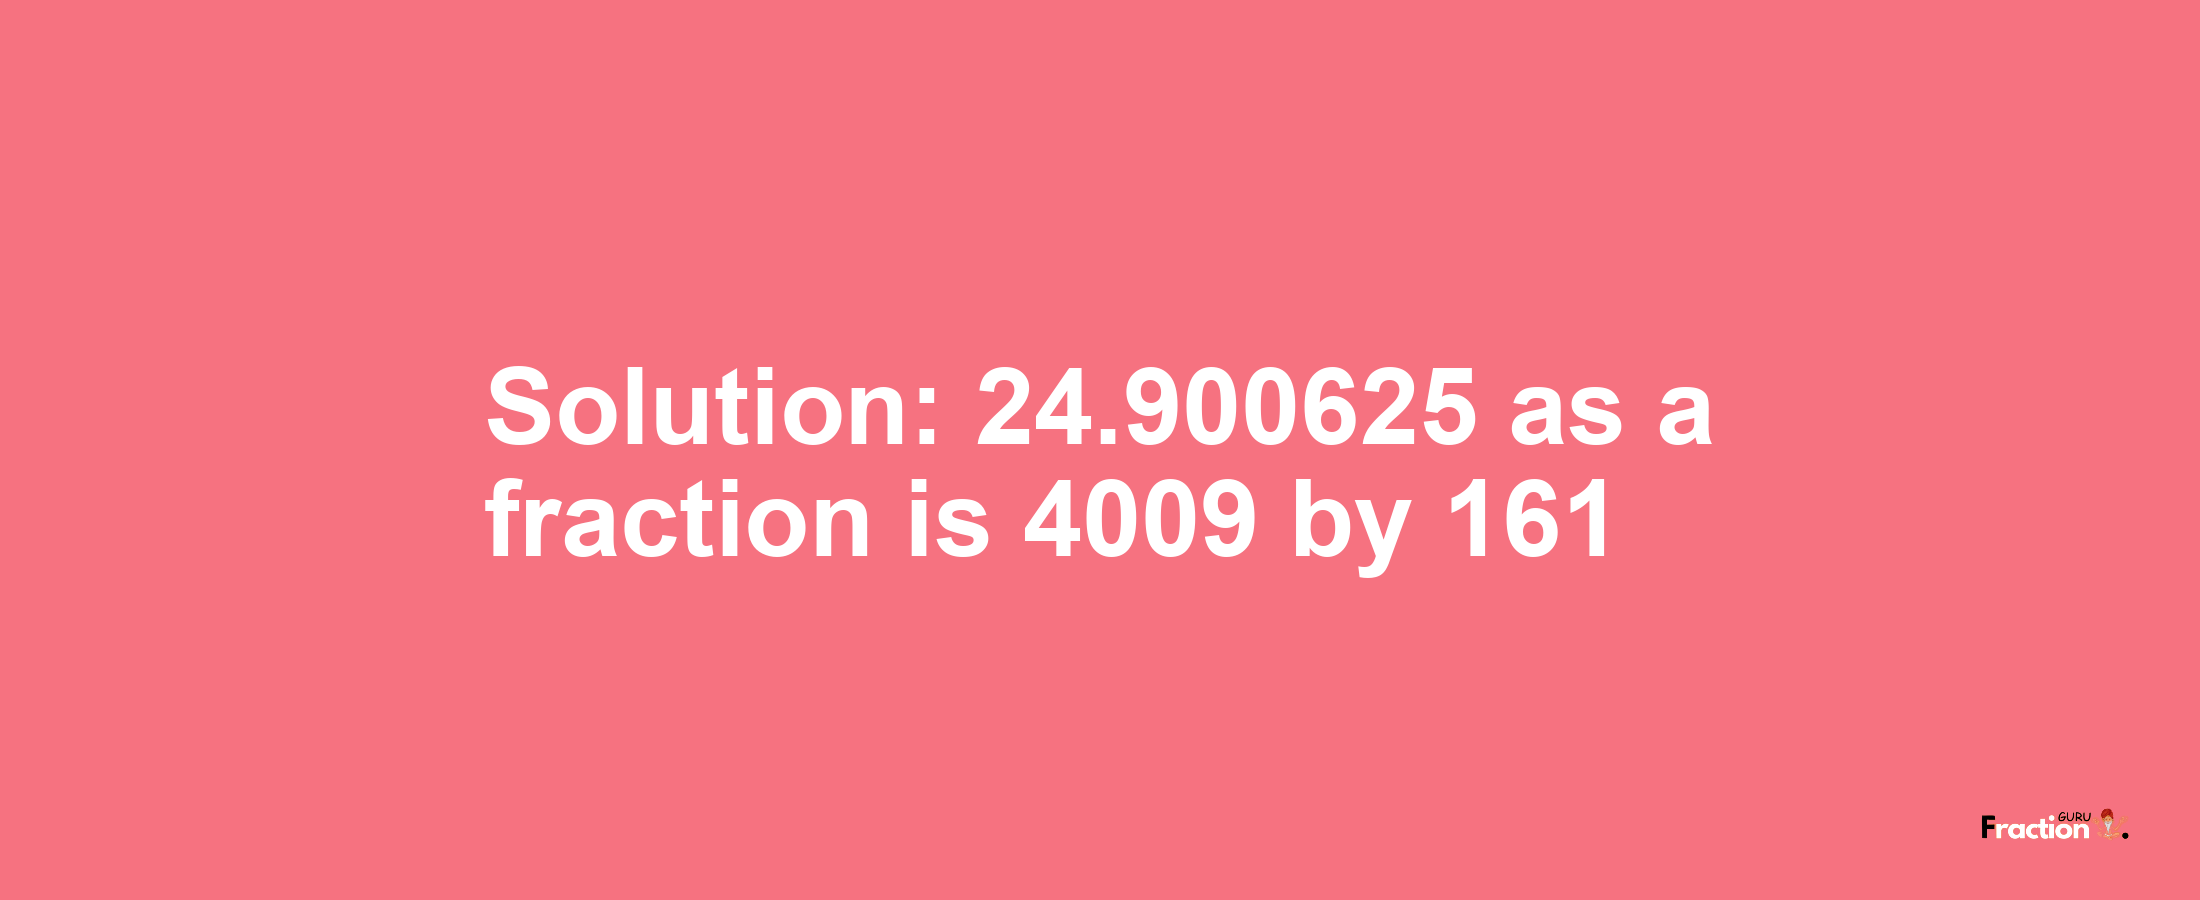 Solution:24.900625 as a fraction is 4009/161